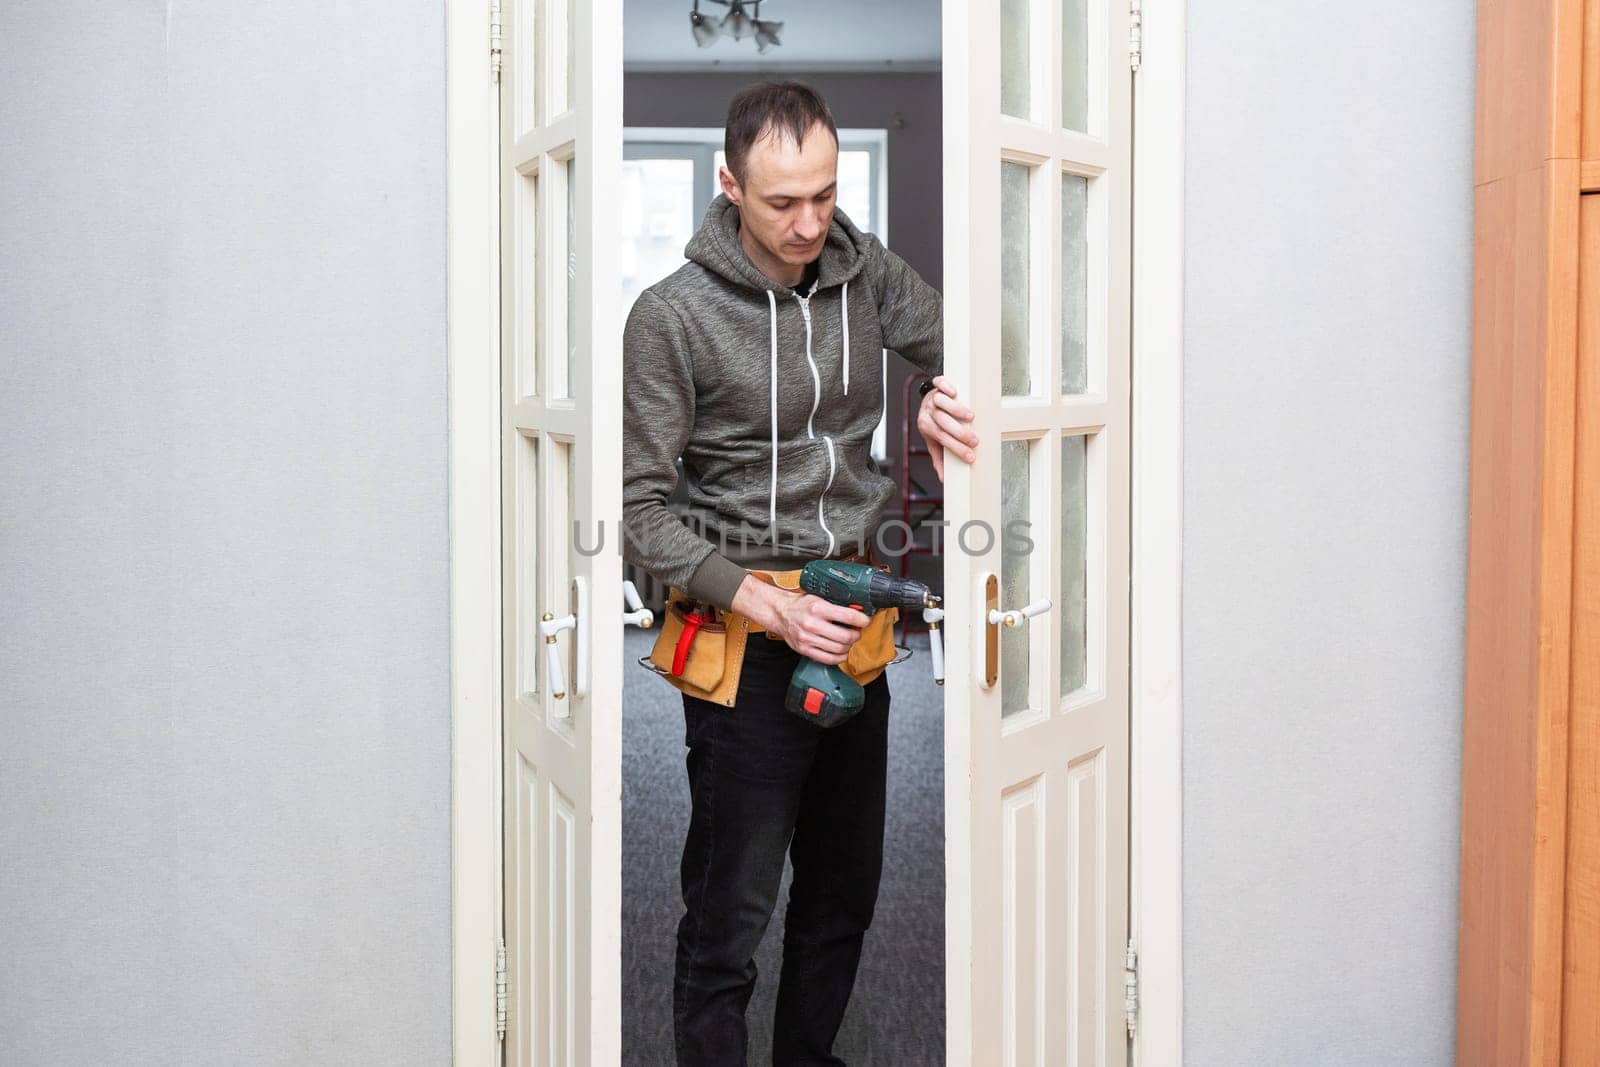 Maintenance Concept. Focused serious young locksmith with tattoo on hand wearing blue uniform standing on one knee in doorway installing doorknob handle, repairing wooden front door entrance. High quality photo